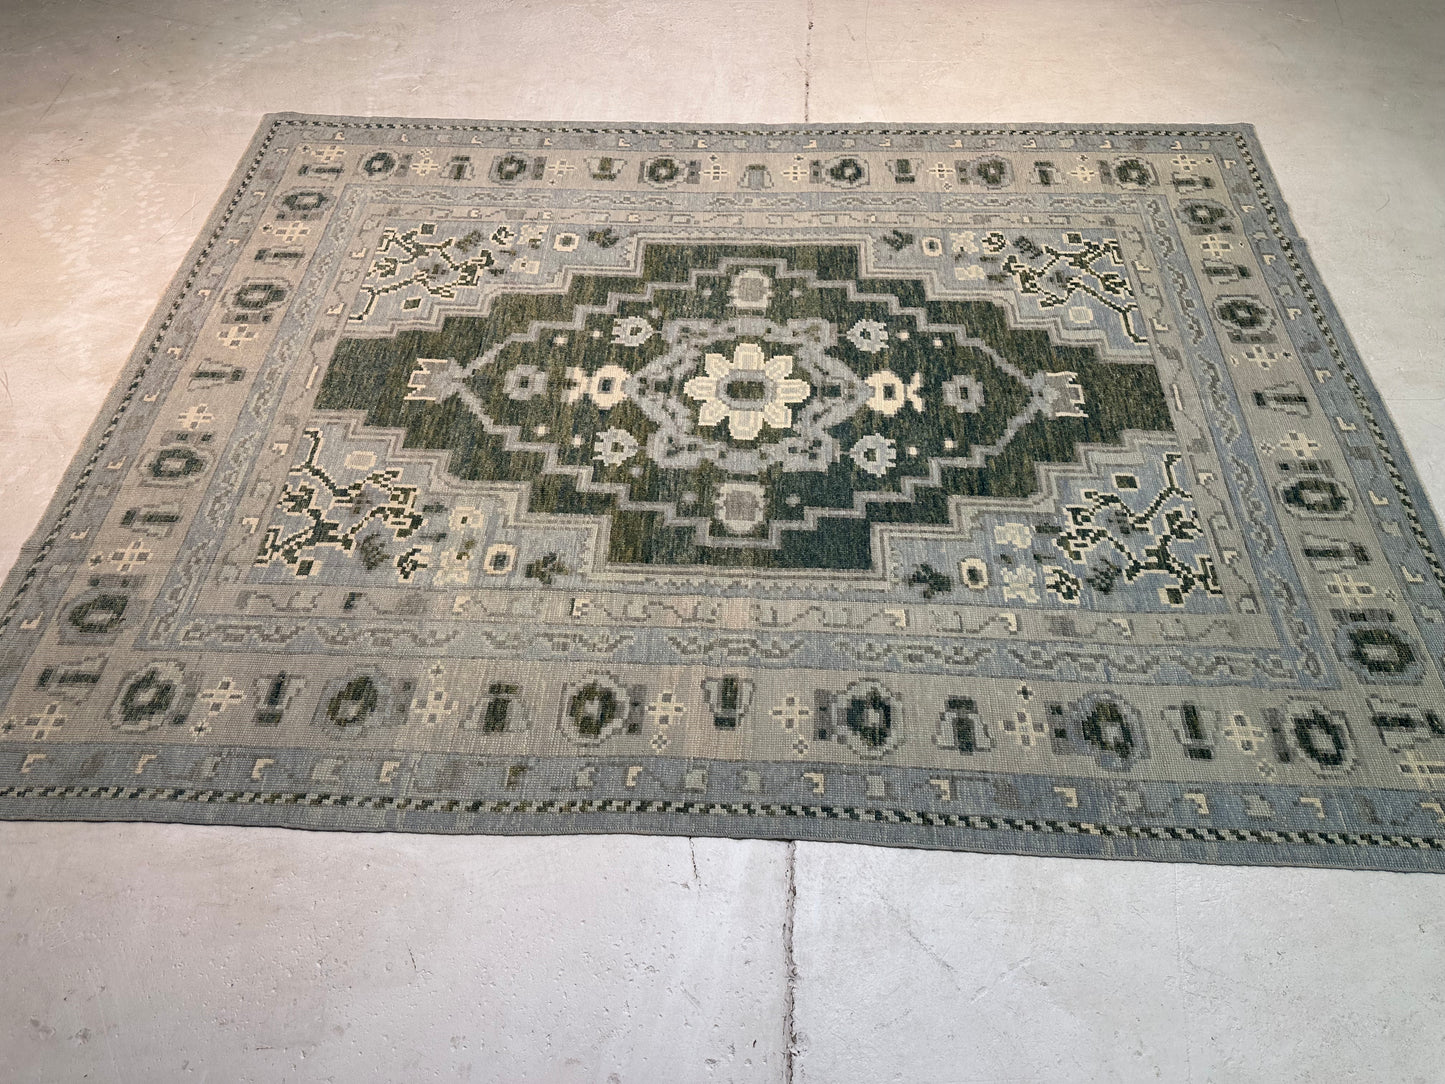 Hand-Knotted Wool Rug Turkish Oushak 9'3" x 12'2"